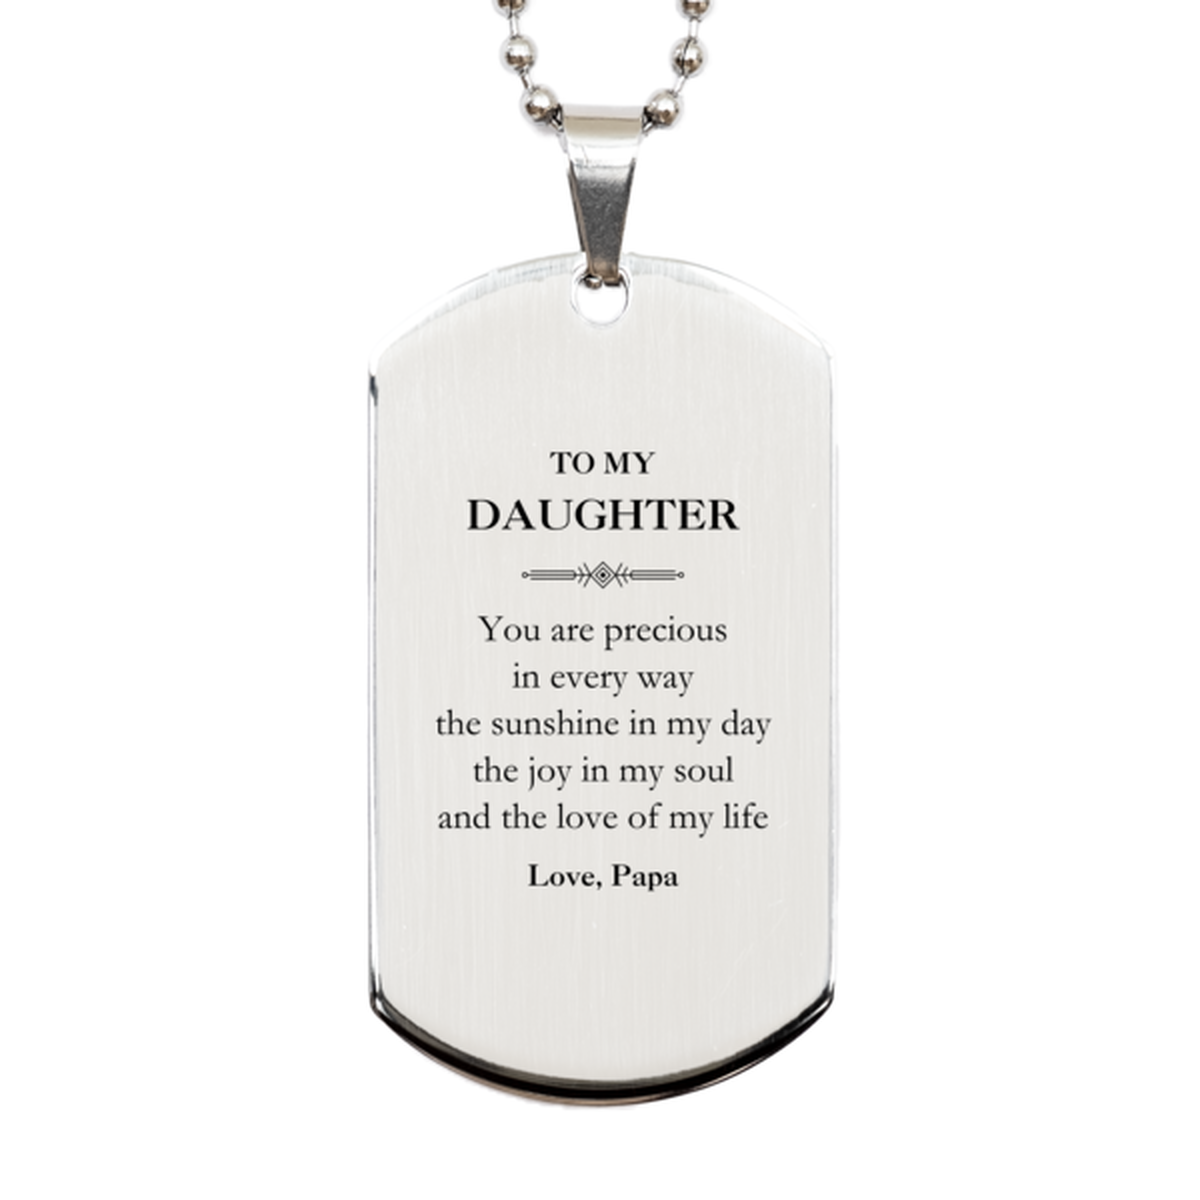 Graduation Gifts for Daughter Silver Dog Tag Present from Papa, Christmas Daughter Birthday Gifts Daughter You are precious in every way the sunshine in my day. Love, Papa